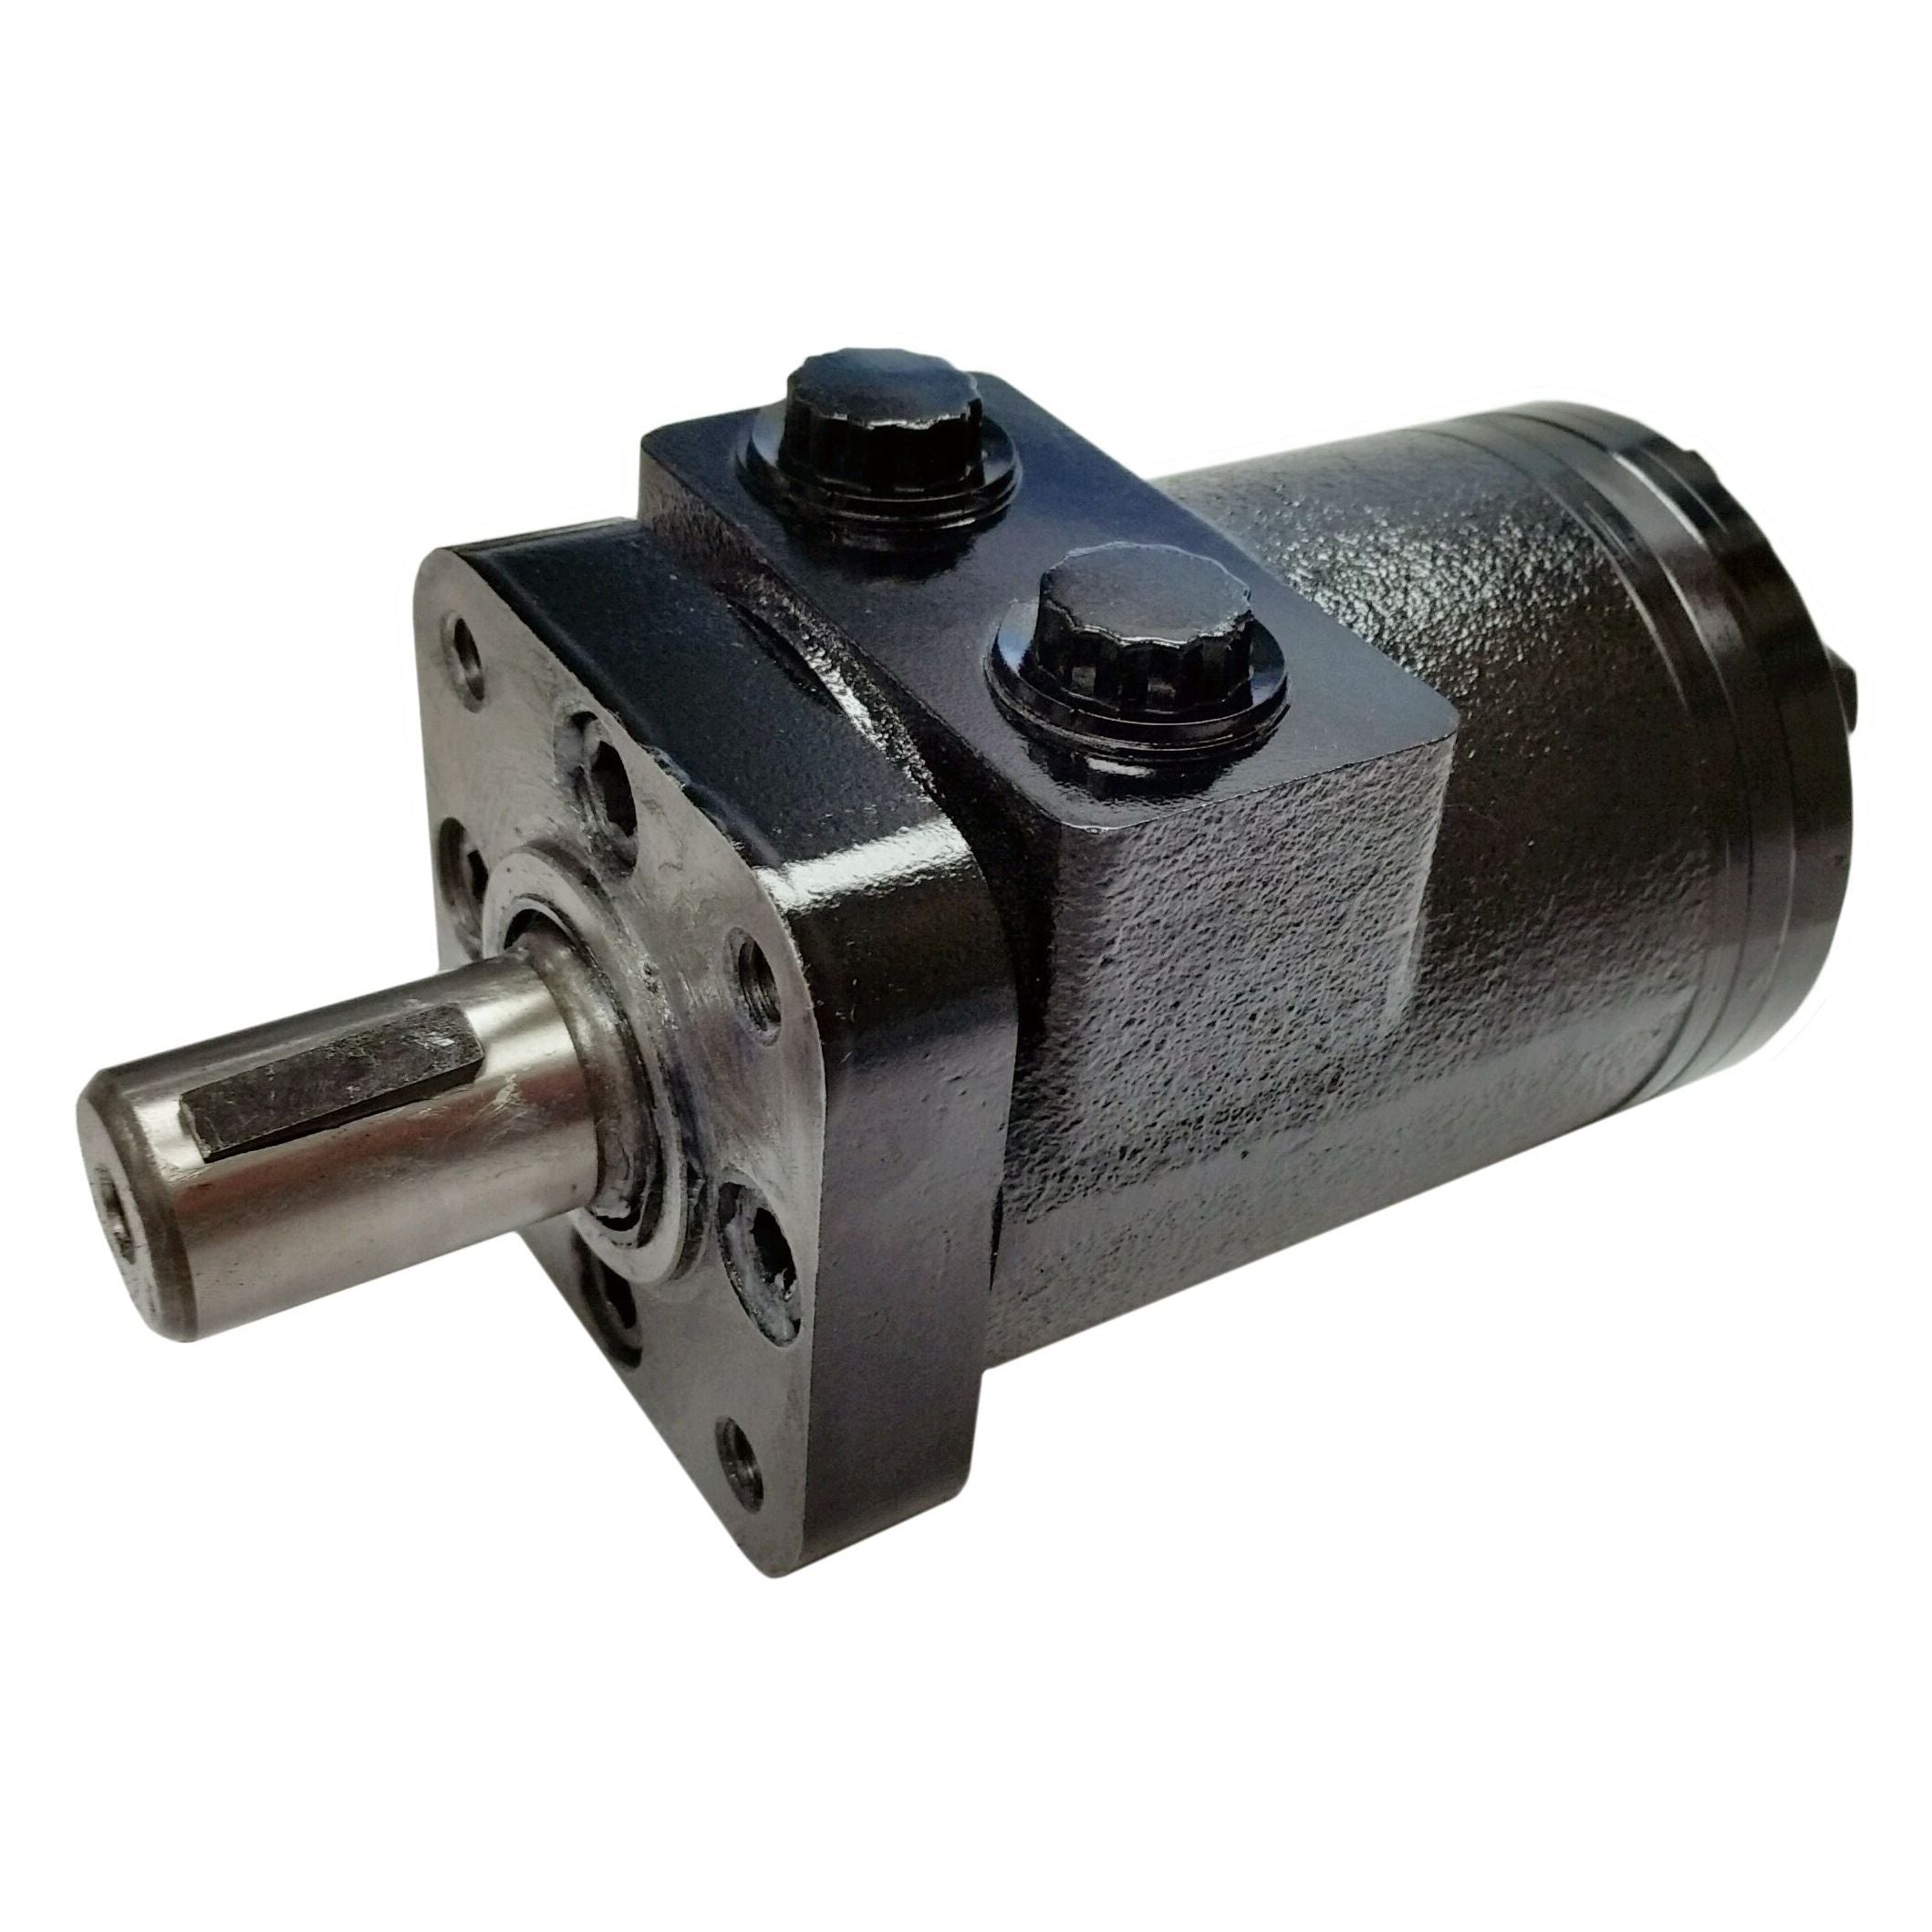 BMPH-50-H4-S-F : Dynamic LSHT Motor, 51.7cc, 1150RPM, 885in-lb, 2031psi Differential, 15.85GPM, SAE A 4-Bolt Mount, 6-Tooth Shaft, Side Ported, Manifold